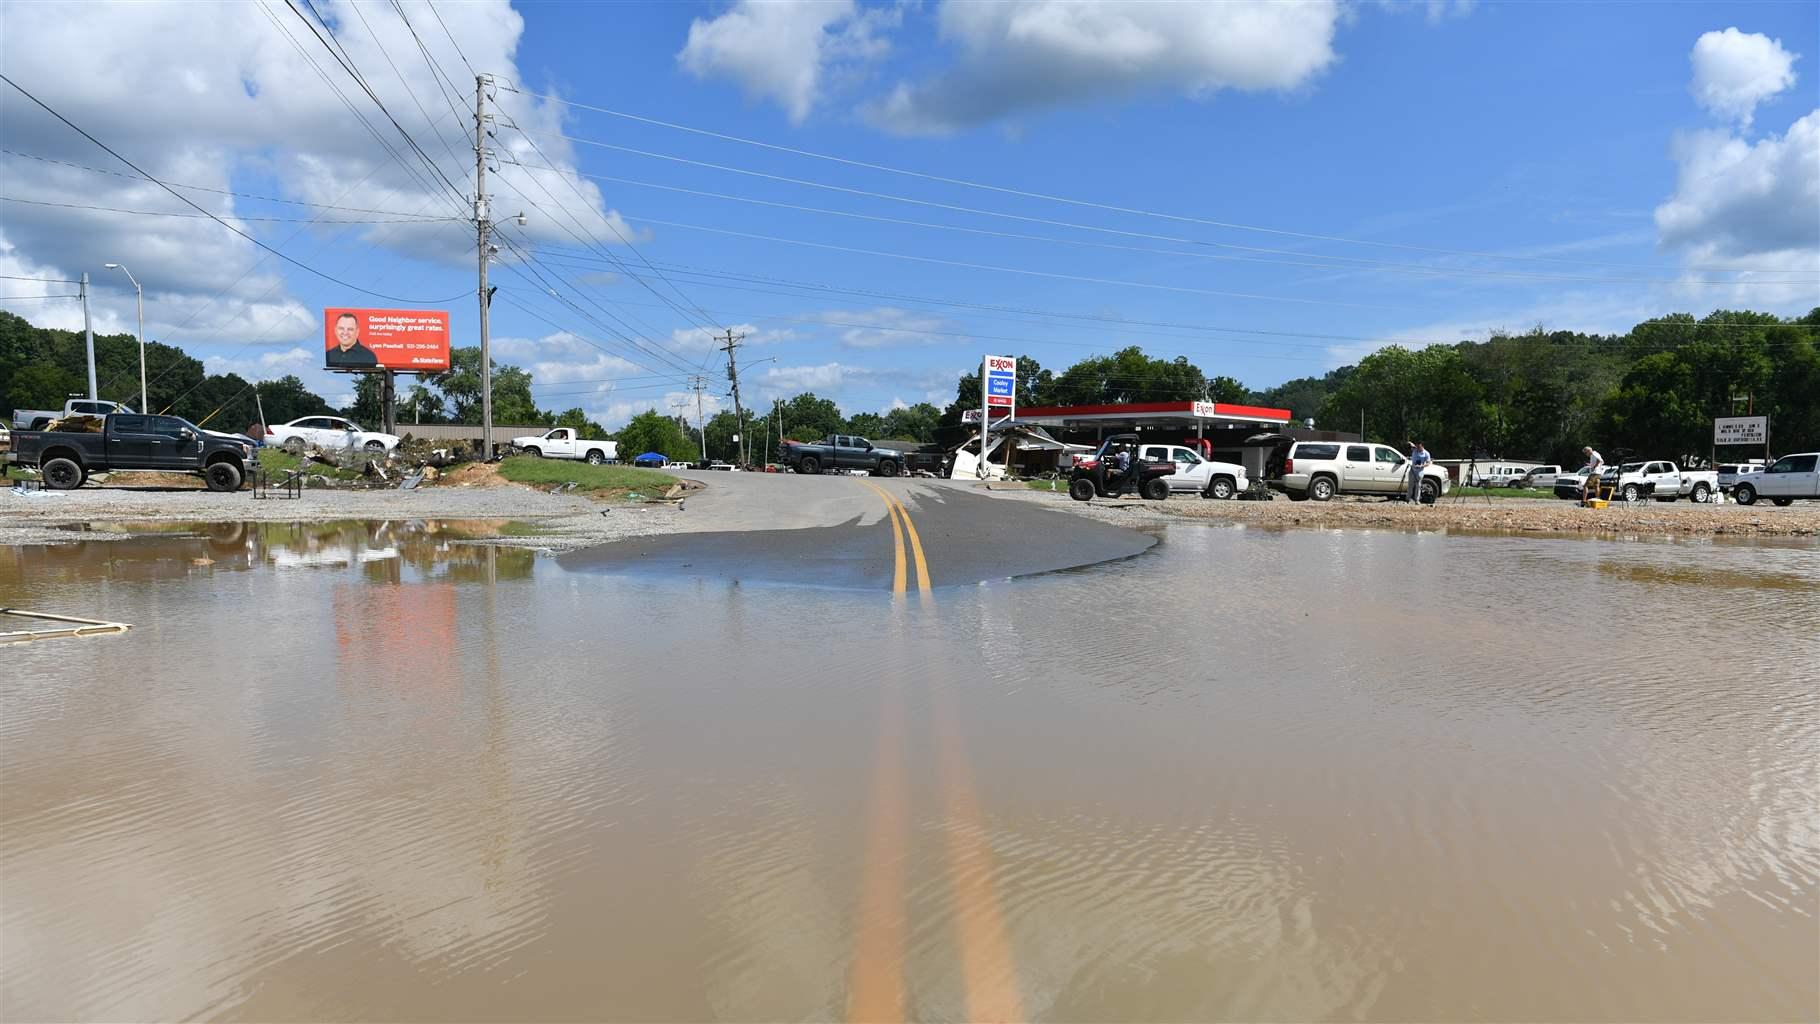 A view of the damage after heavy rain and devastating floods in Waverly, Tennessee, United States on August 22, 2021.